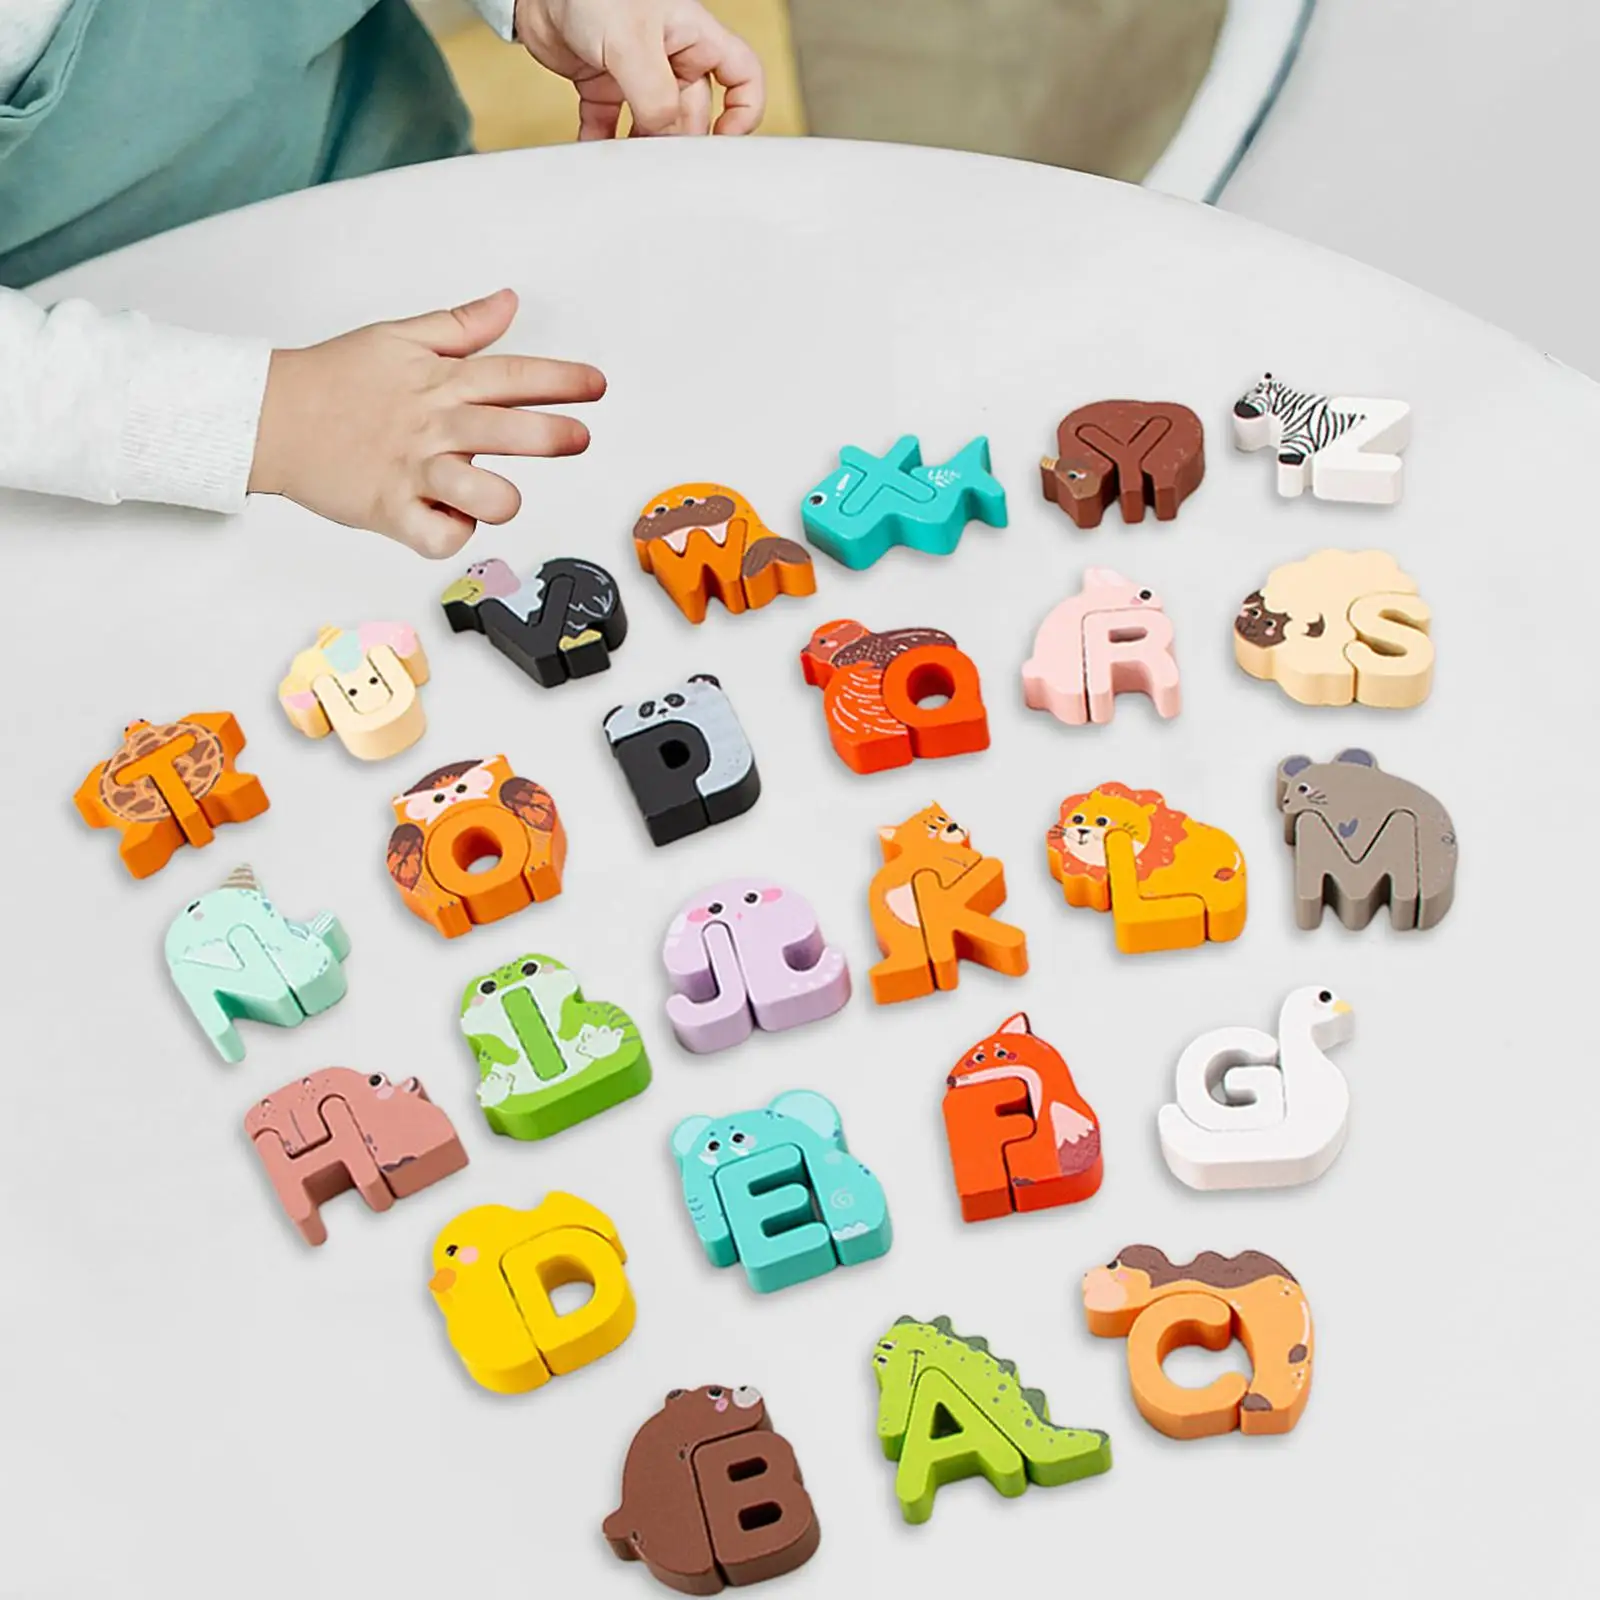 

Alphabet Puzzle Abc Alphabet Learning Toy Cute Montessori Preschool Animal Puzzle Wooden Puzzle for Children Toddlers Kids